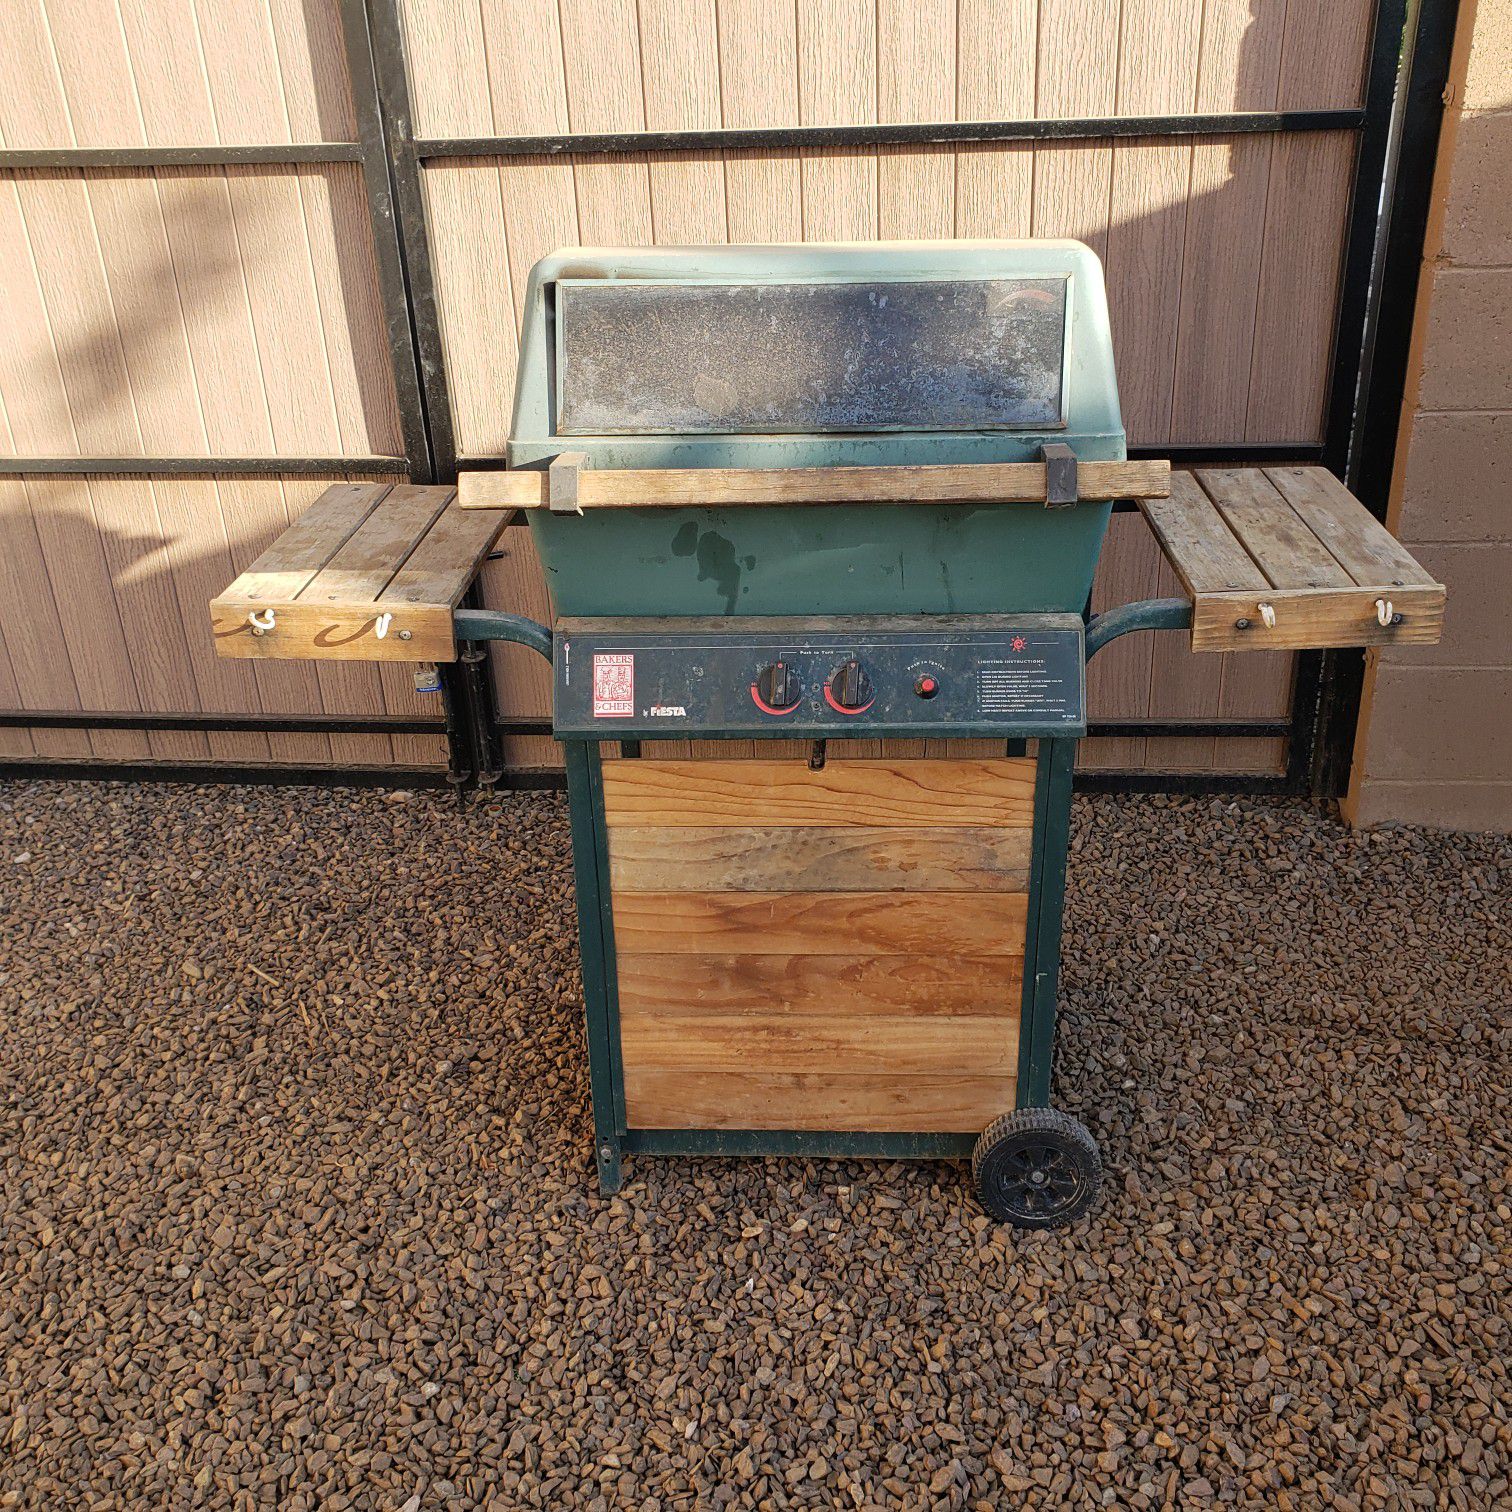 BBQ Grill in working condition